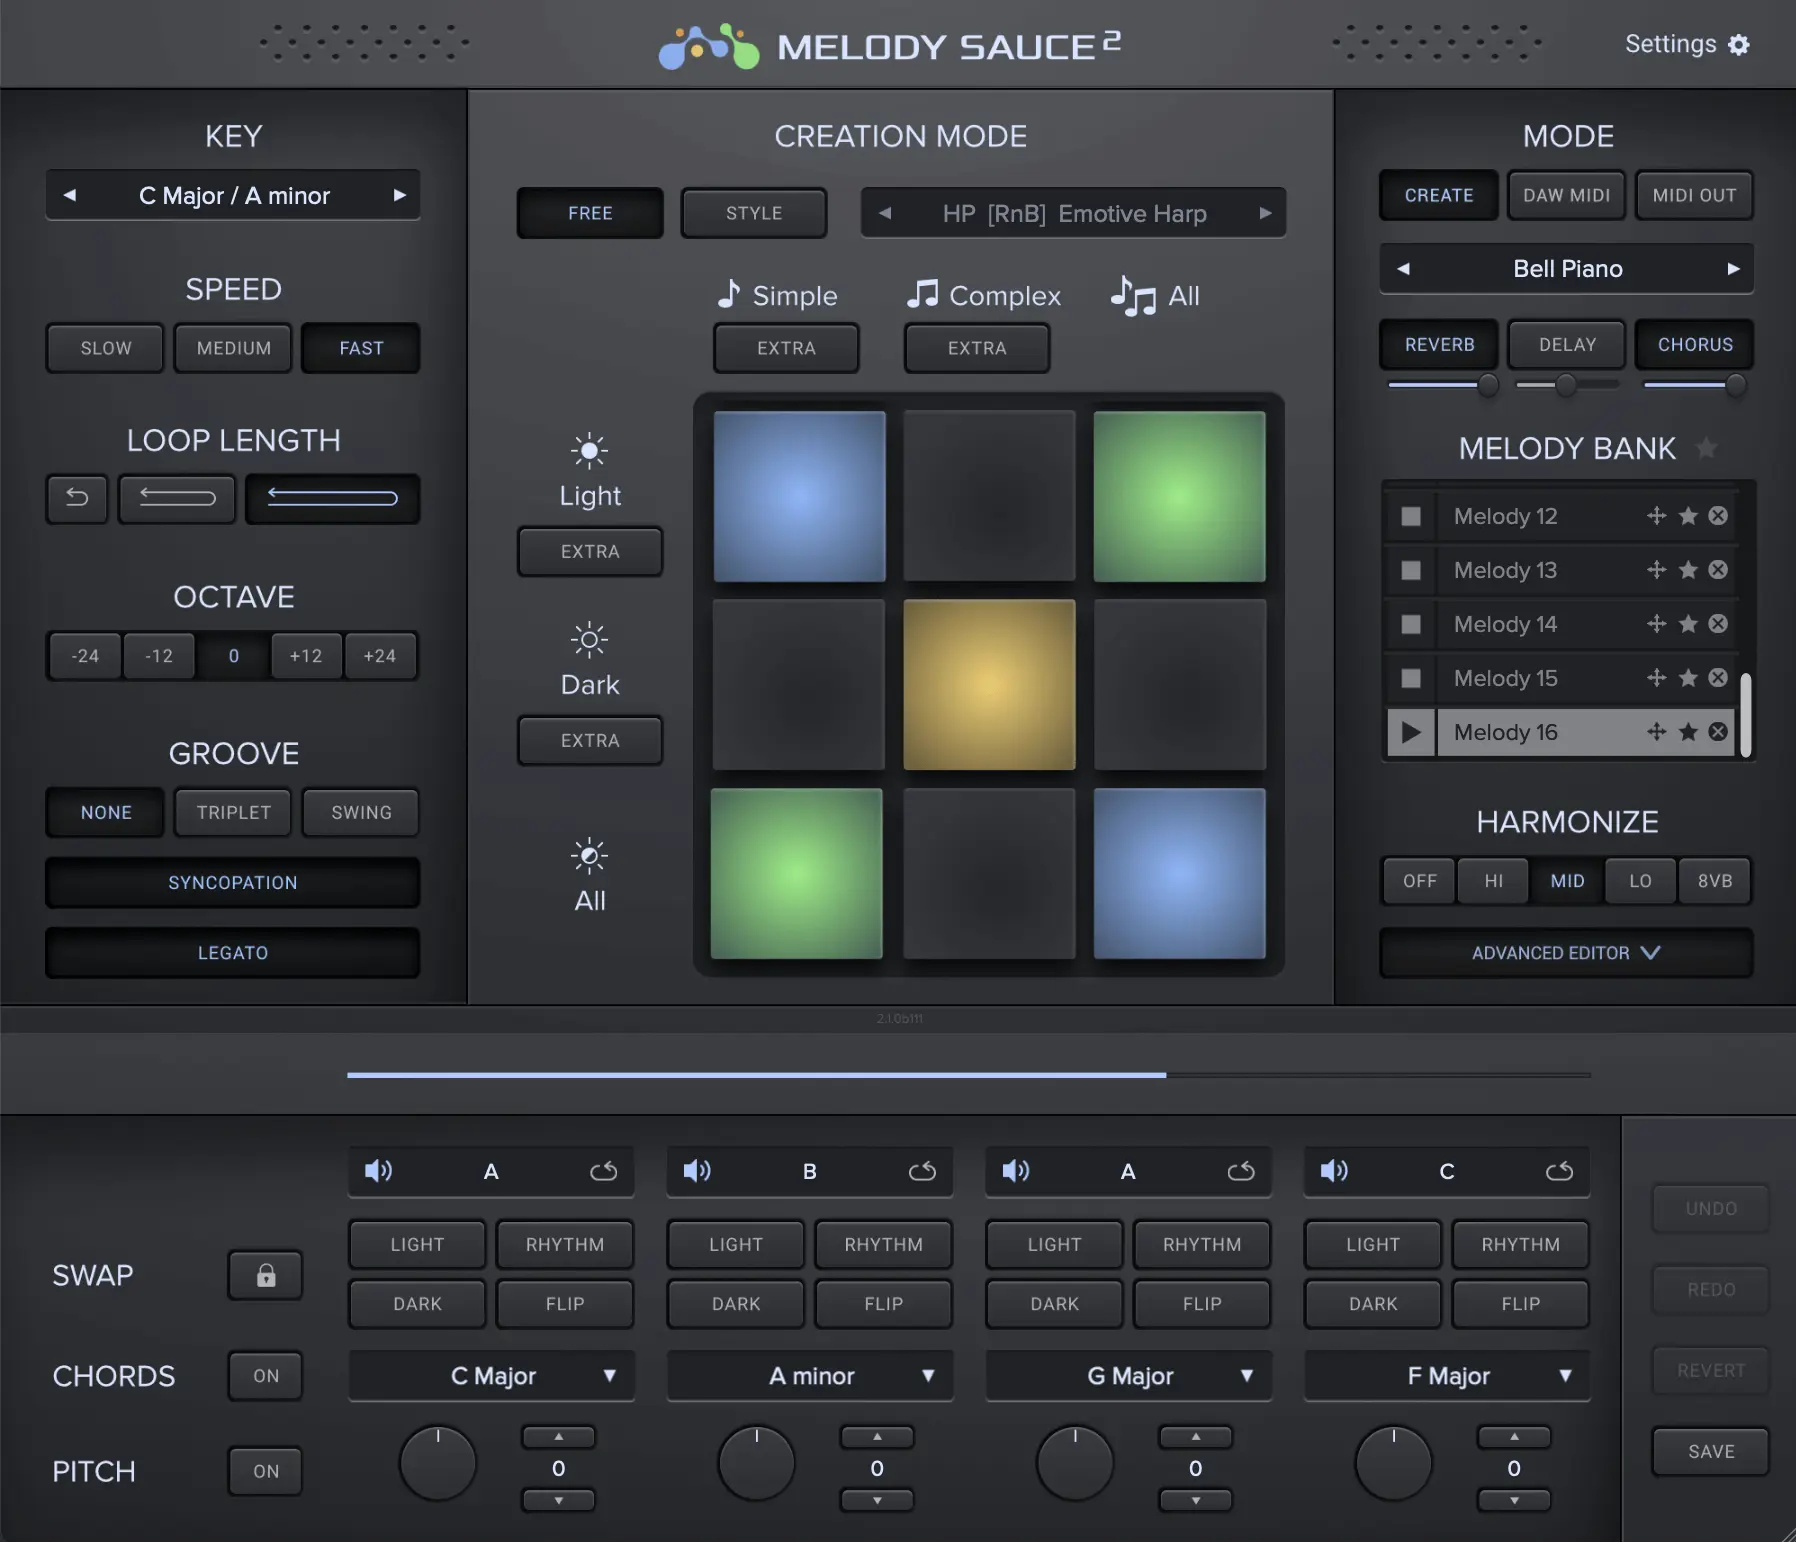 image to melody sauce 2 plugin, with button's, slider's and blue,yellow,green square's in obscure grey mark.